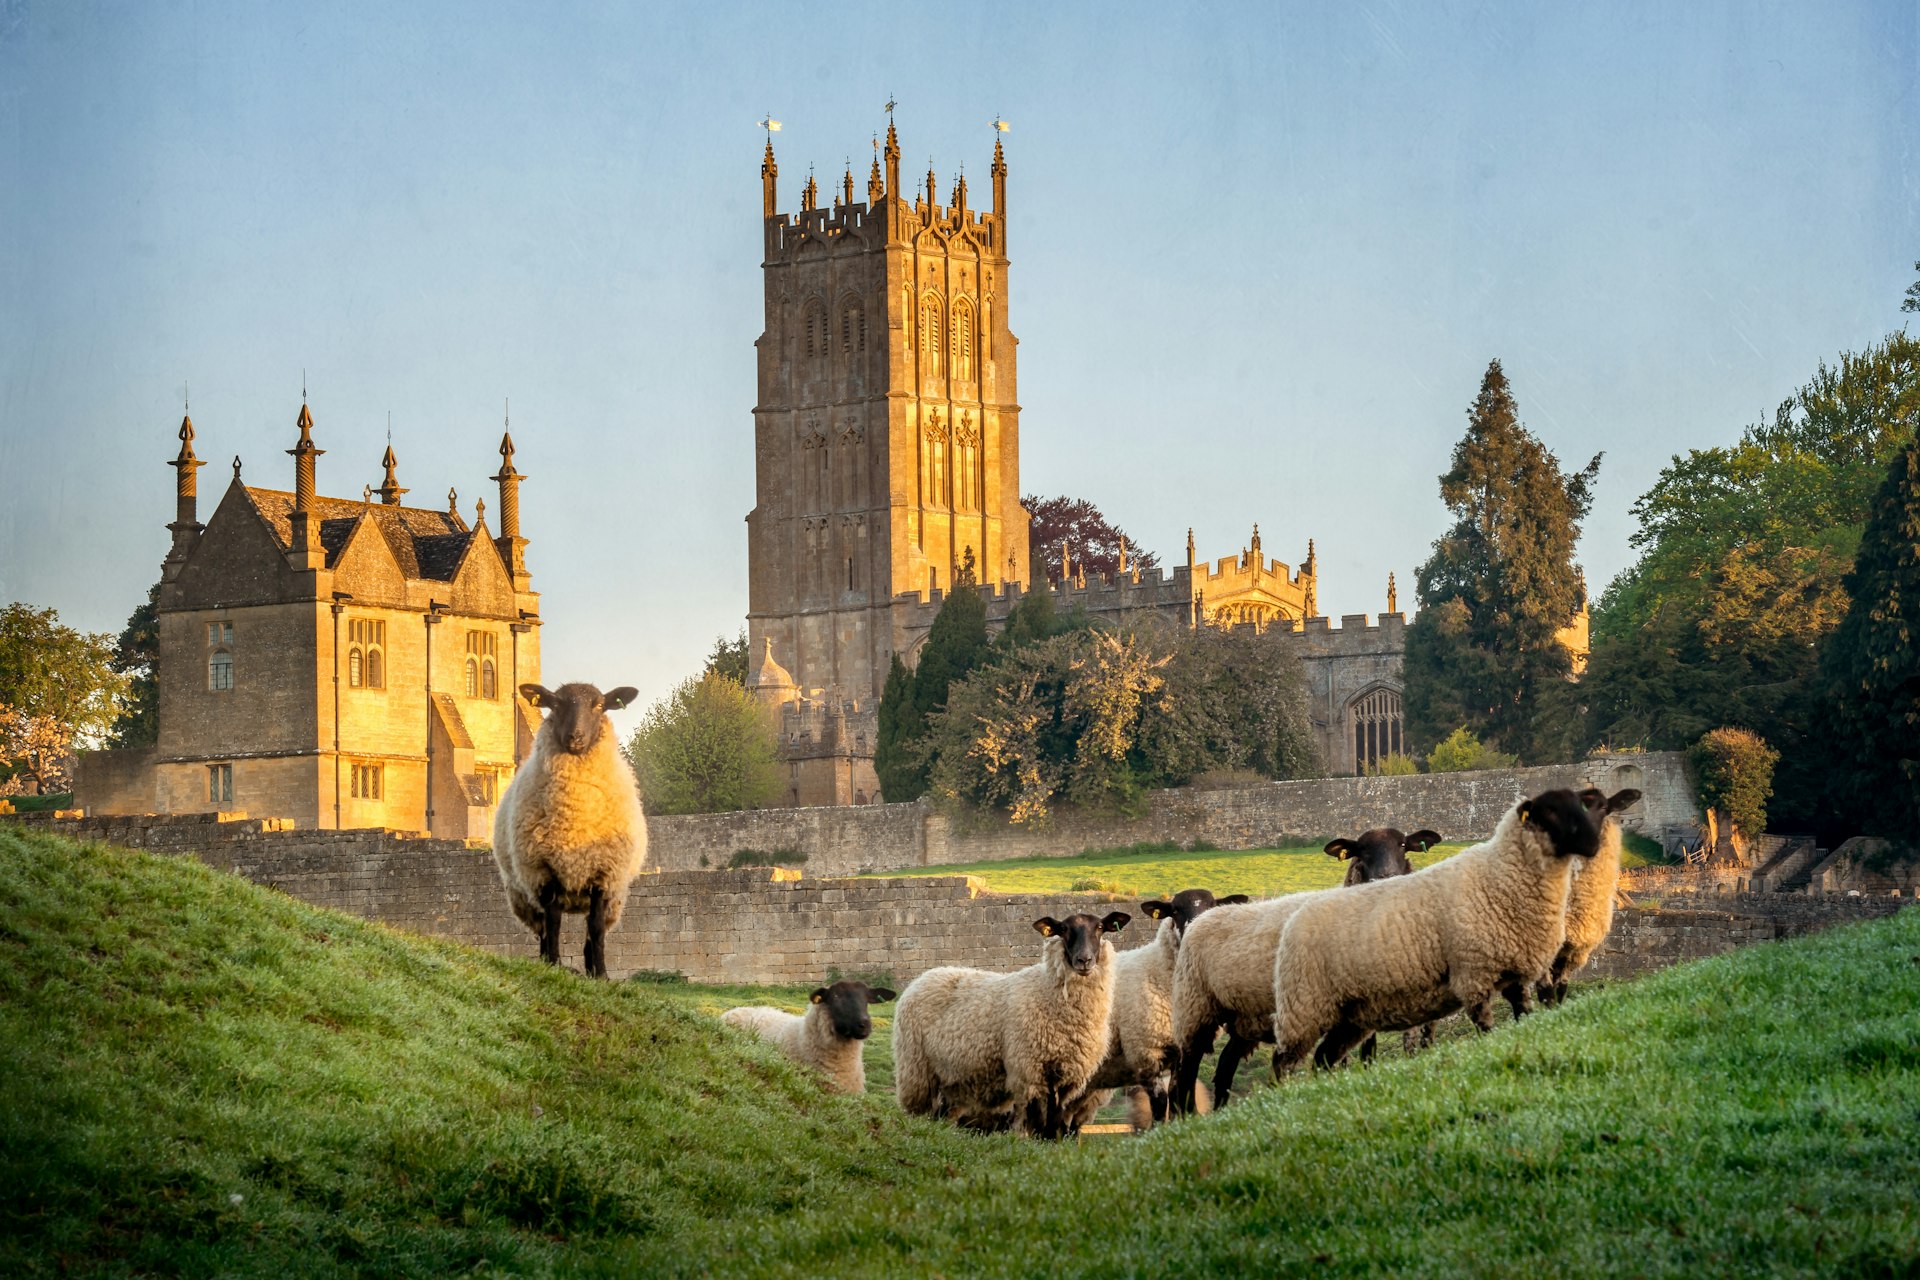 Cotswold sheep near St James' Church in Chipping Campden during the early morning.